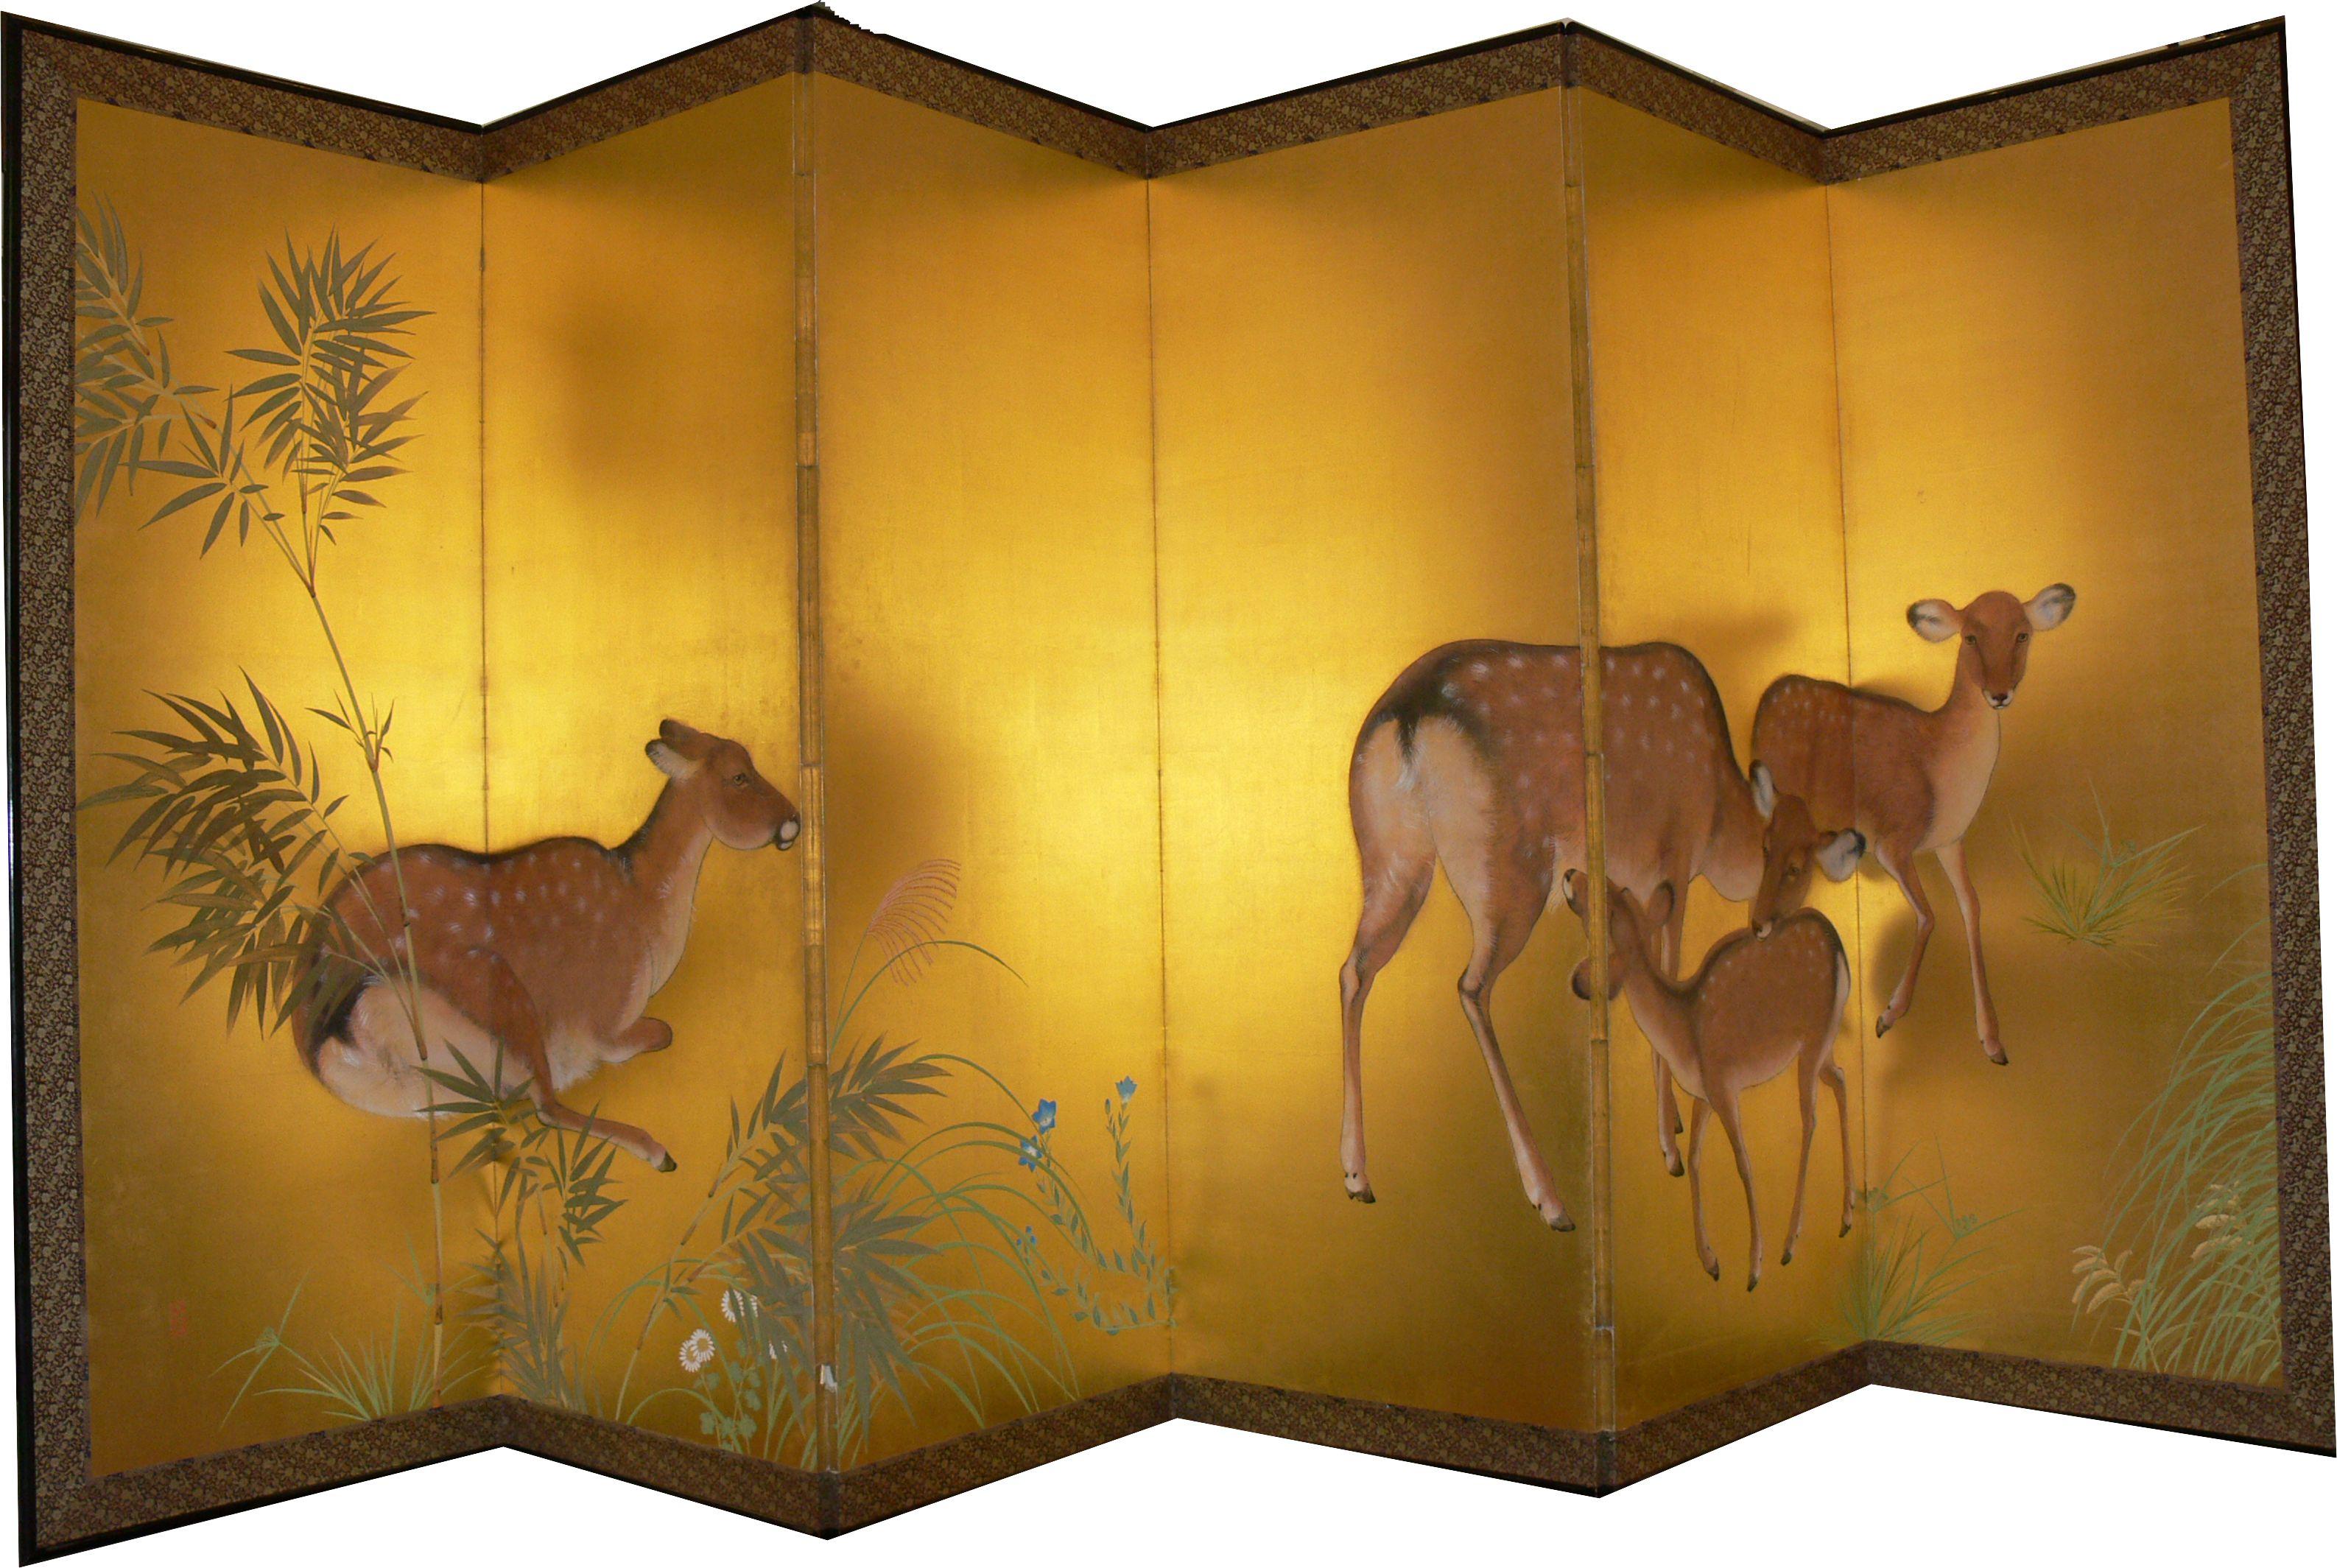 Made in wood, silk, paper, 1921. Six-panel wind wall ( Rokkyoku byobu ) in Nihonga style. Used to separate interiors and enclose private spaces, among other uses. Signed: 